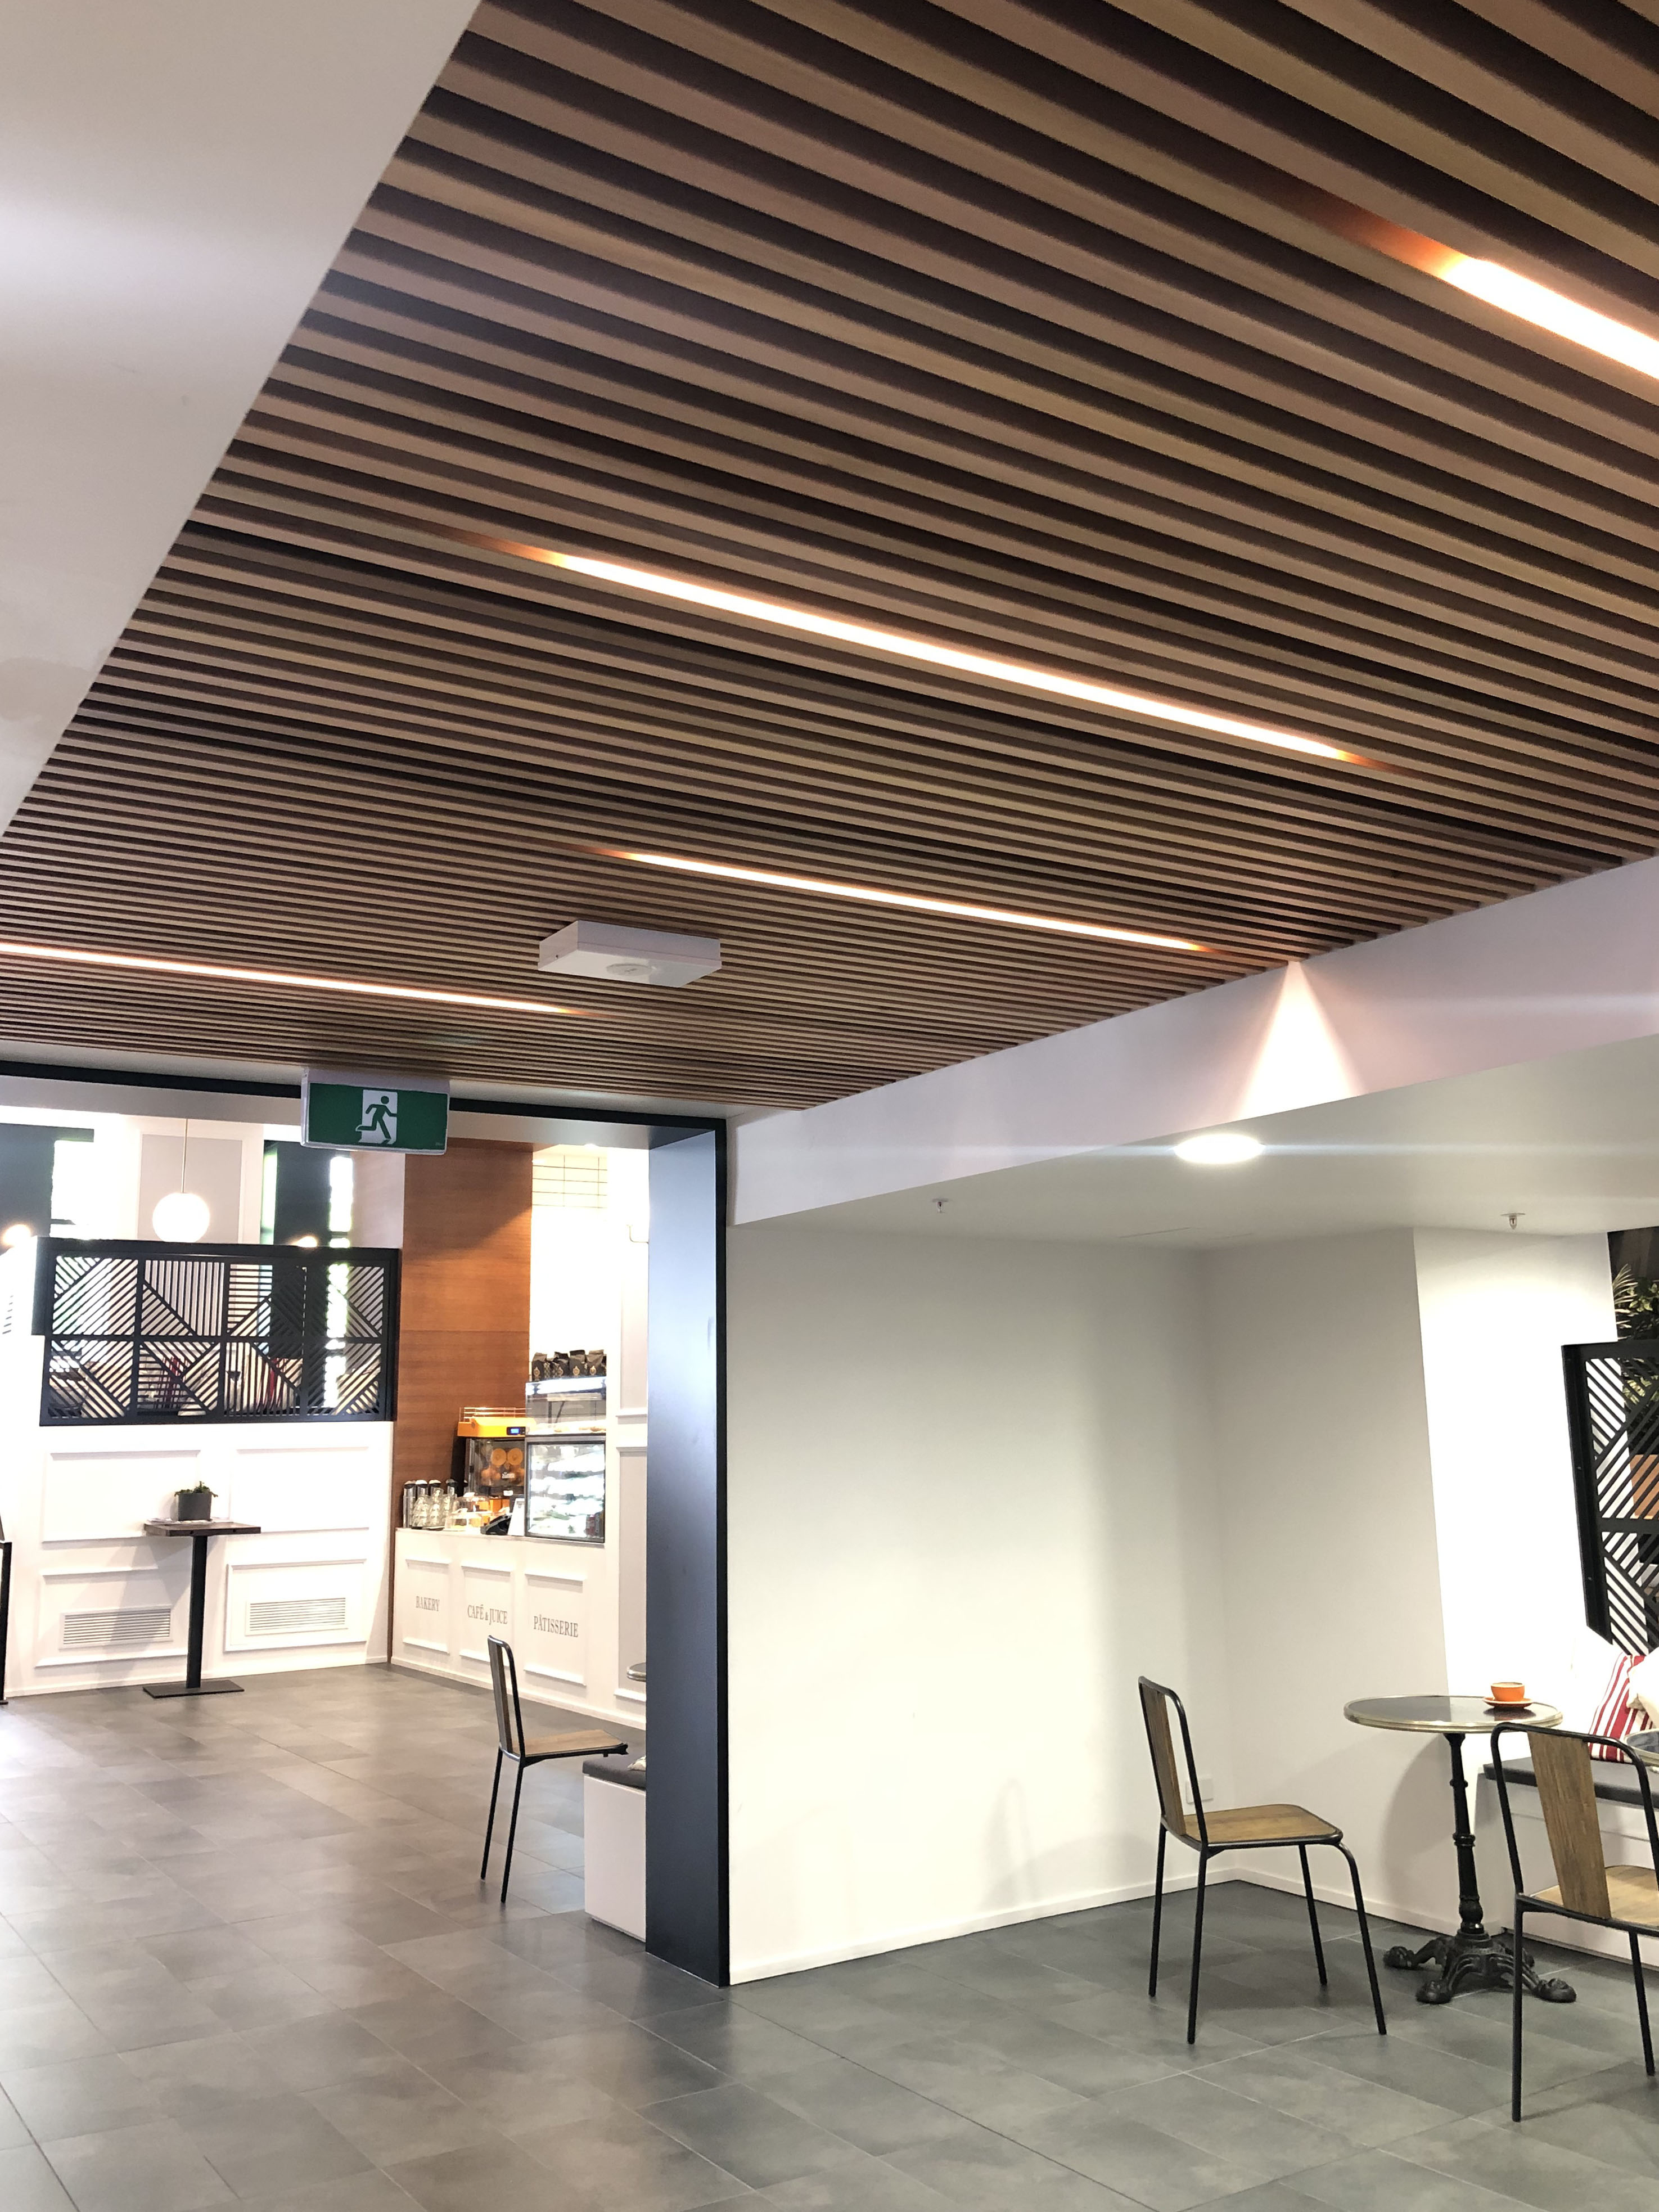 Timber Walls And Ceilings Eboss